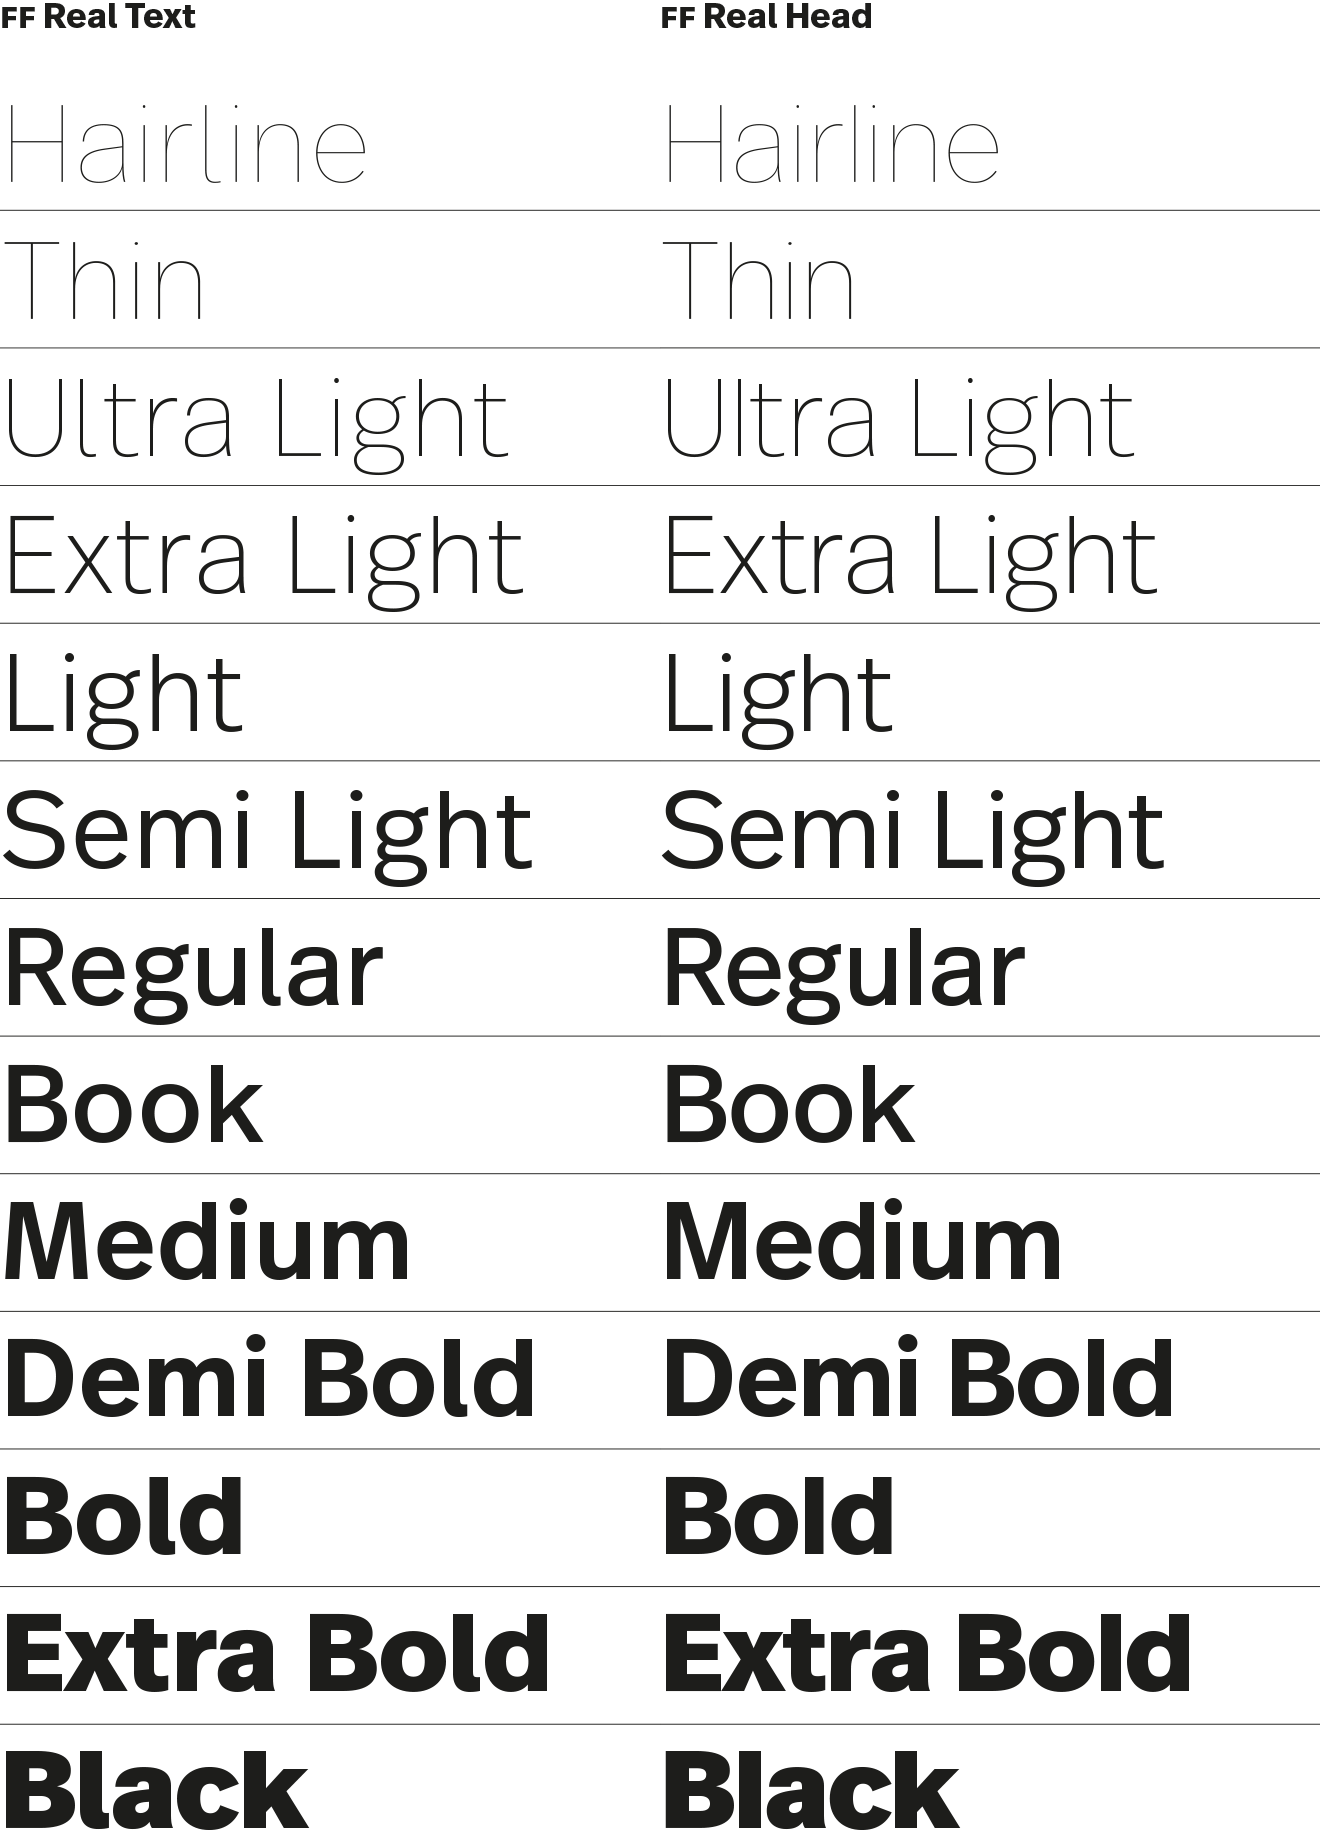 FF Real Text and FF Real Head have been extended to 13 weights, ranging between Hairline and Black.